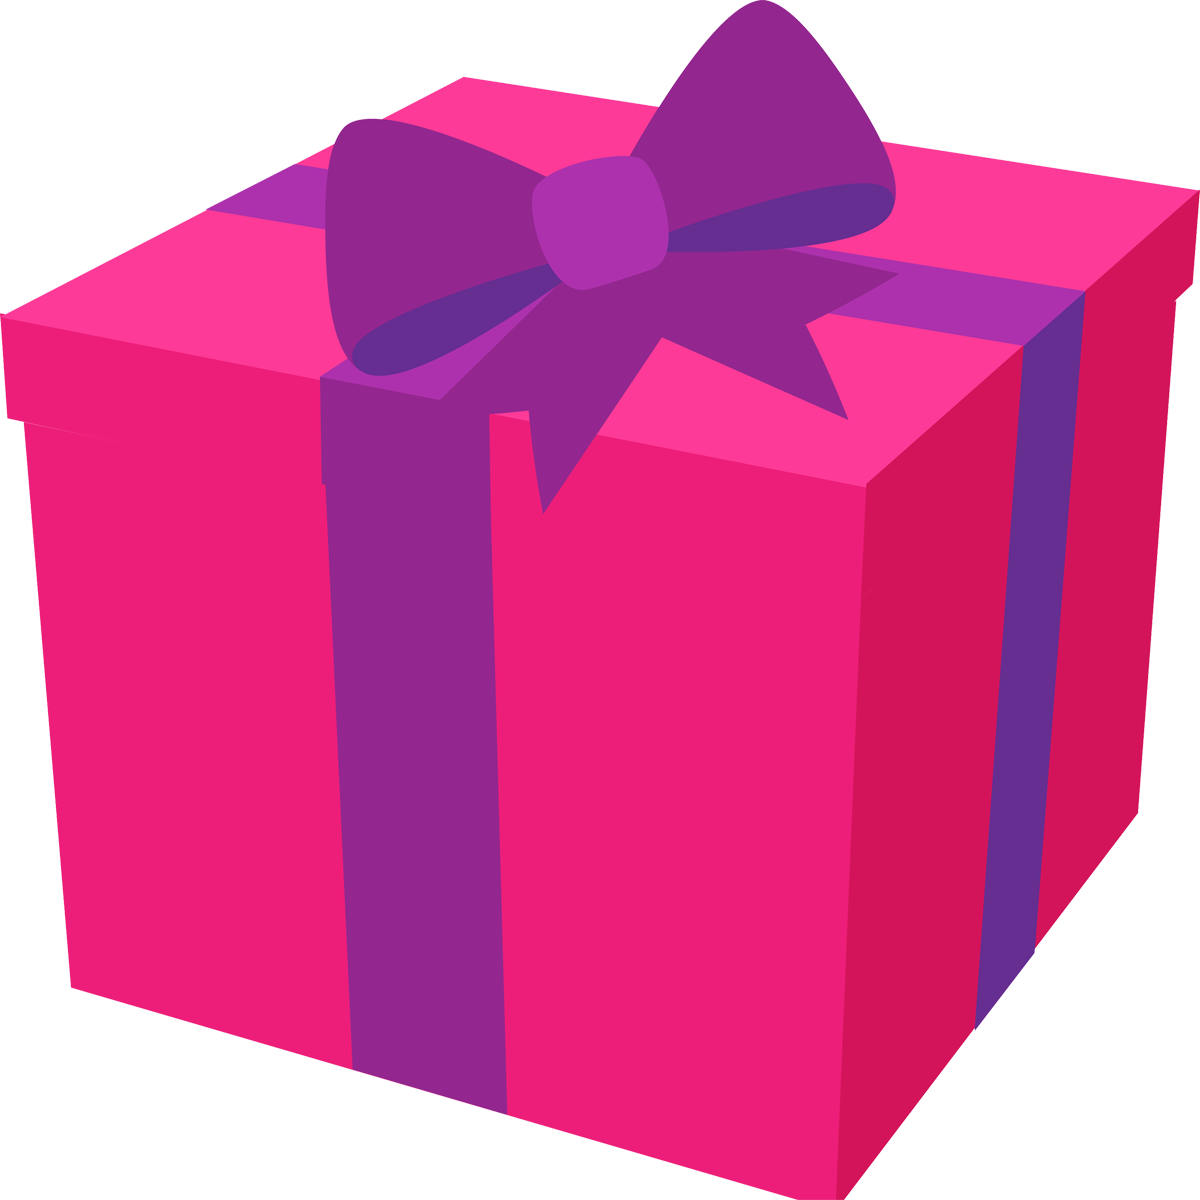 Pink gift box clipart